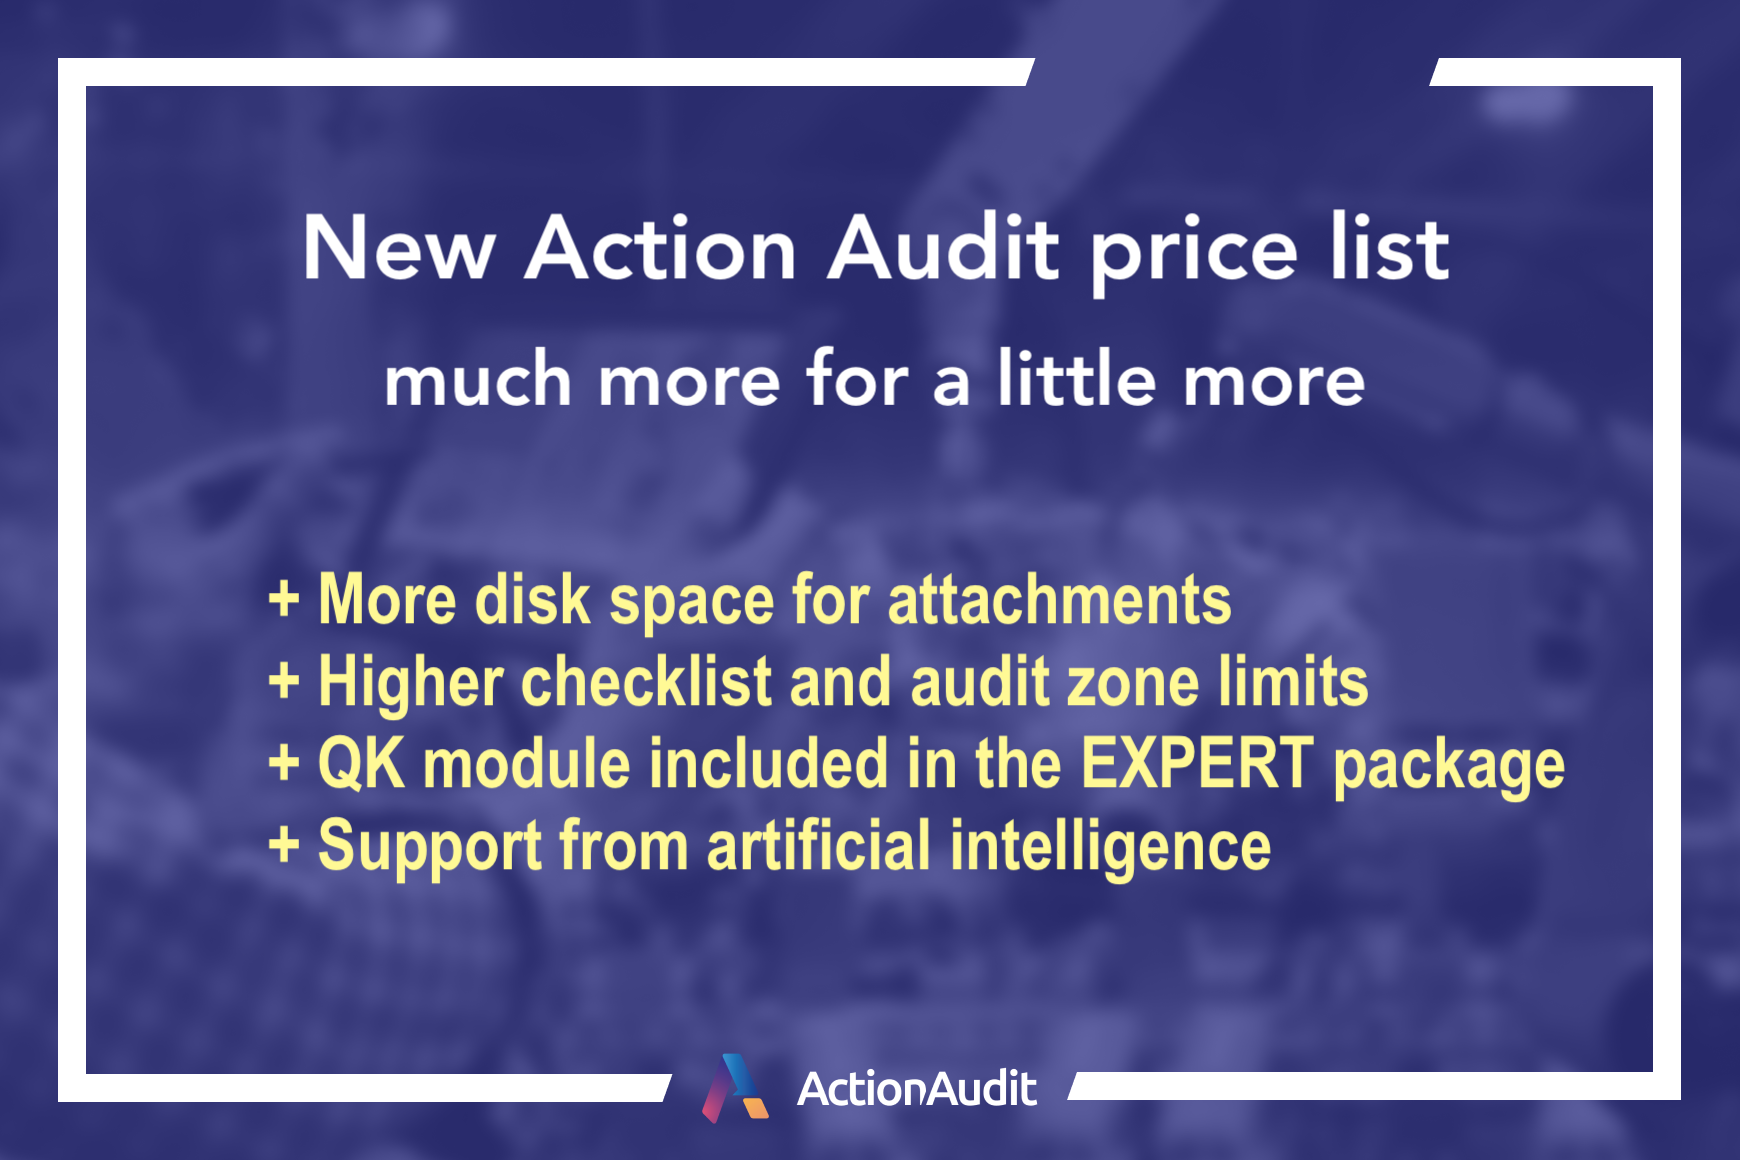 New Action Audit price list. Much more for a little more.